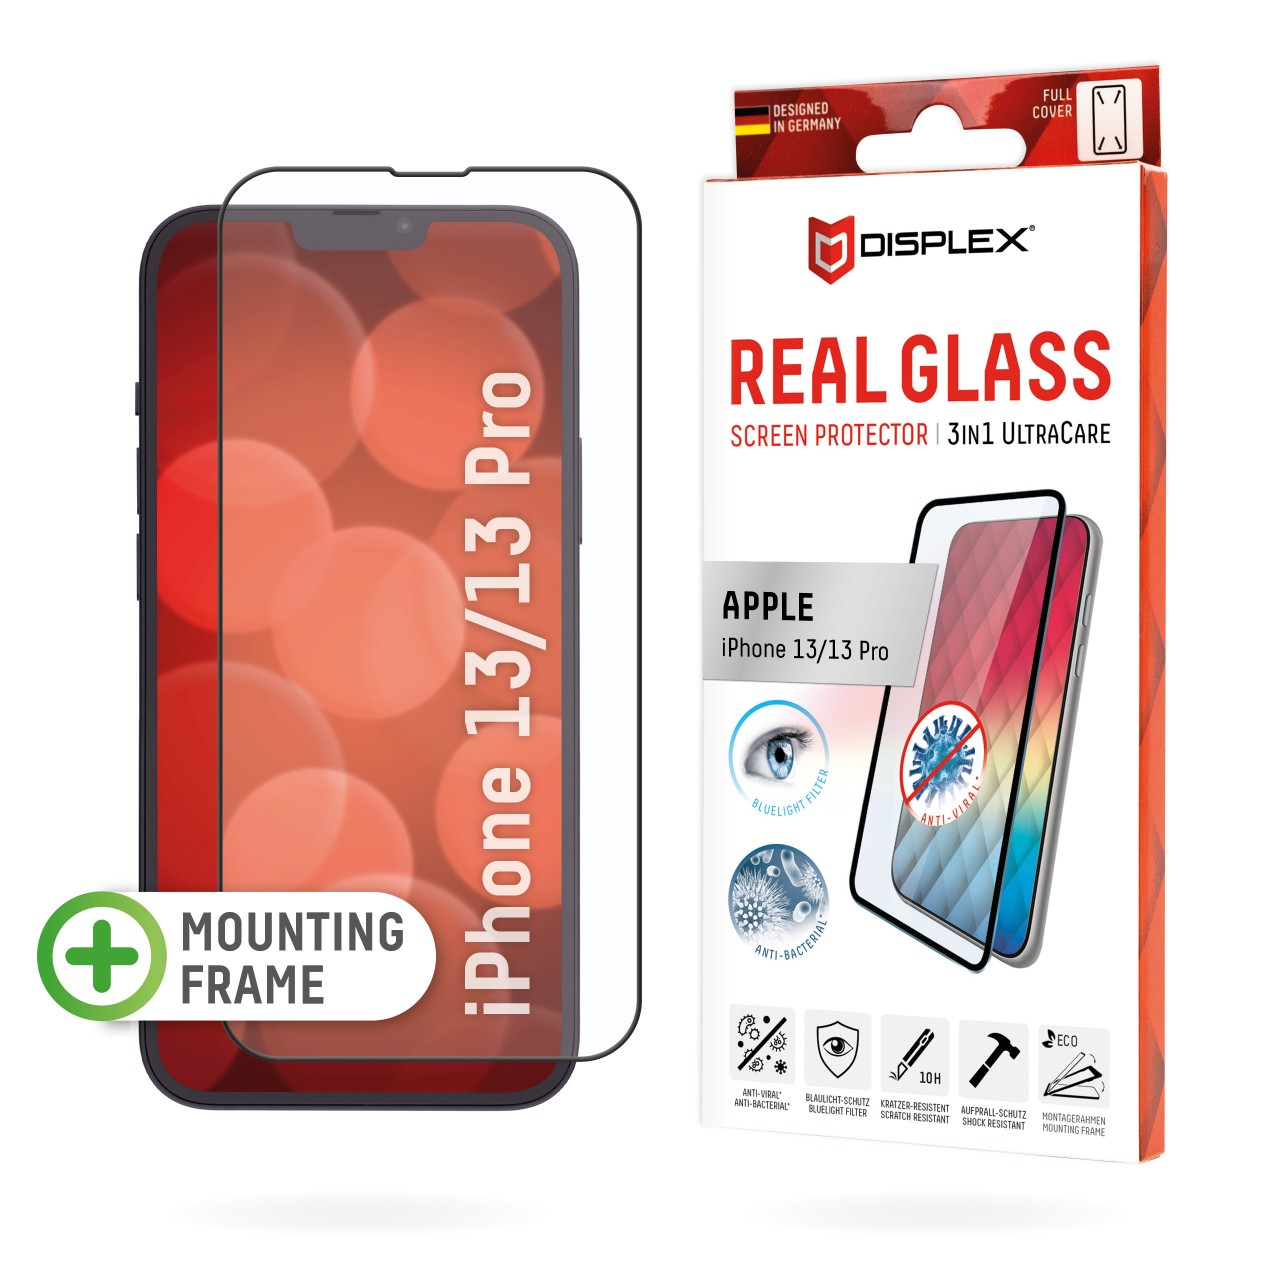 iPhone 13/13 Pro 3in1 Screen Protector (antiviral/ -bacterial)